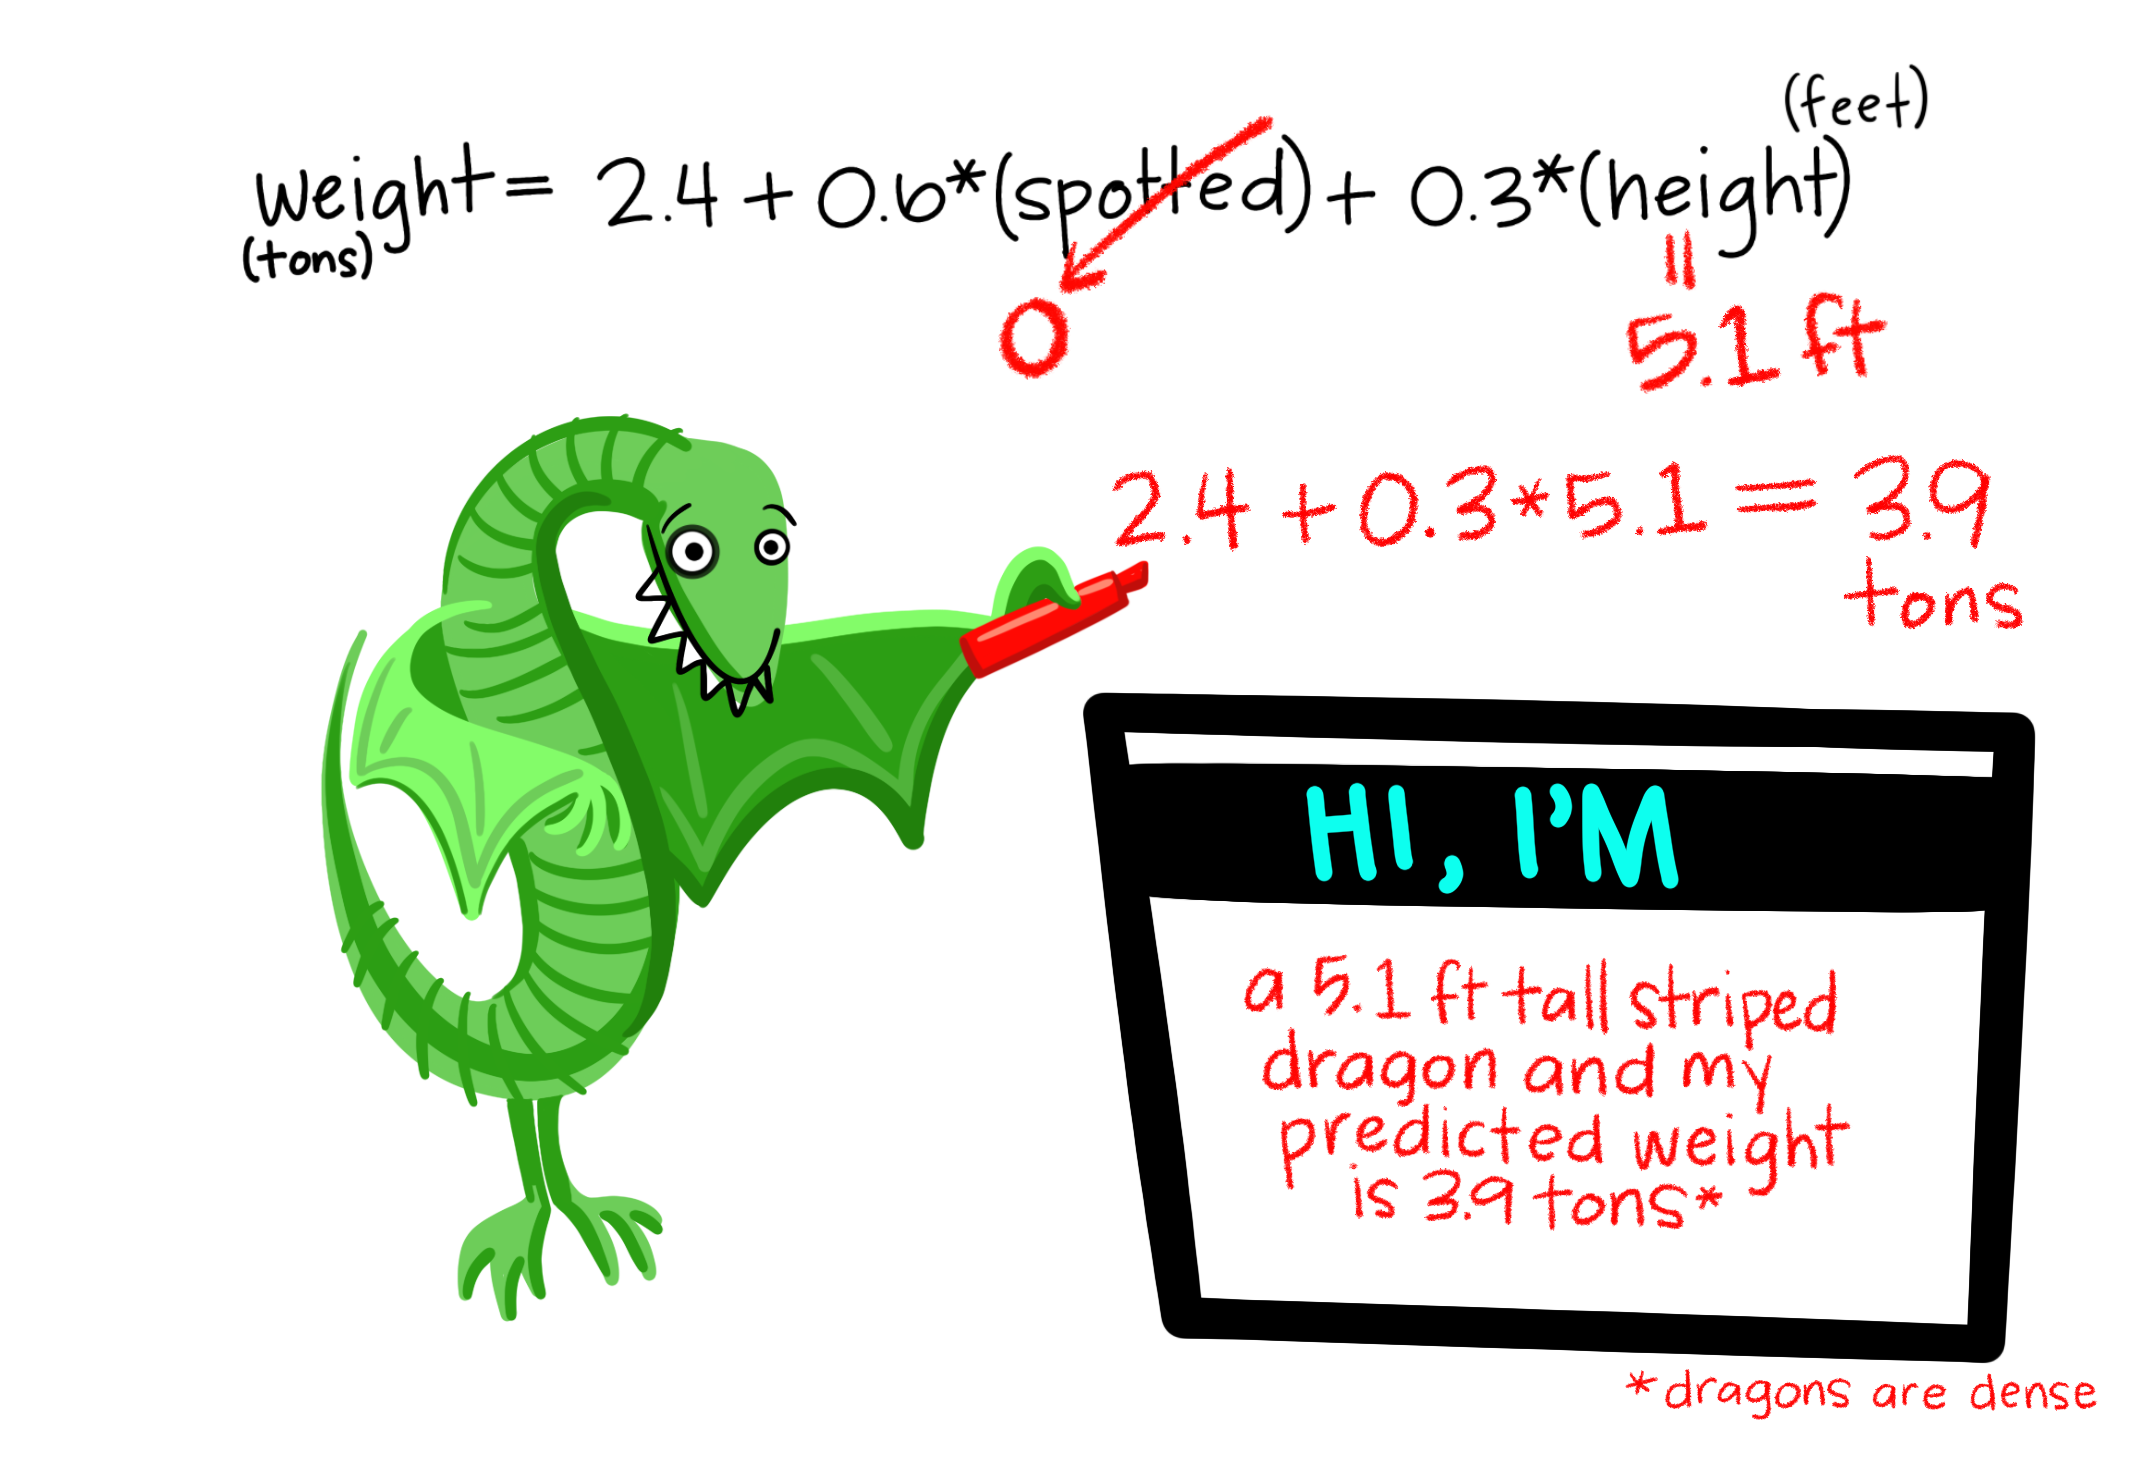 Predicting dragon weight from one continuous variable (height) and one categorical variable (whether or not the dragon is spotted).